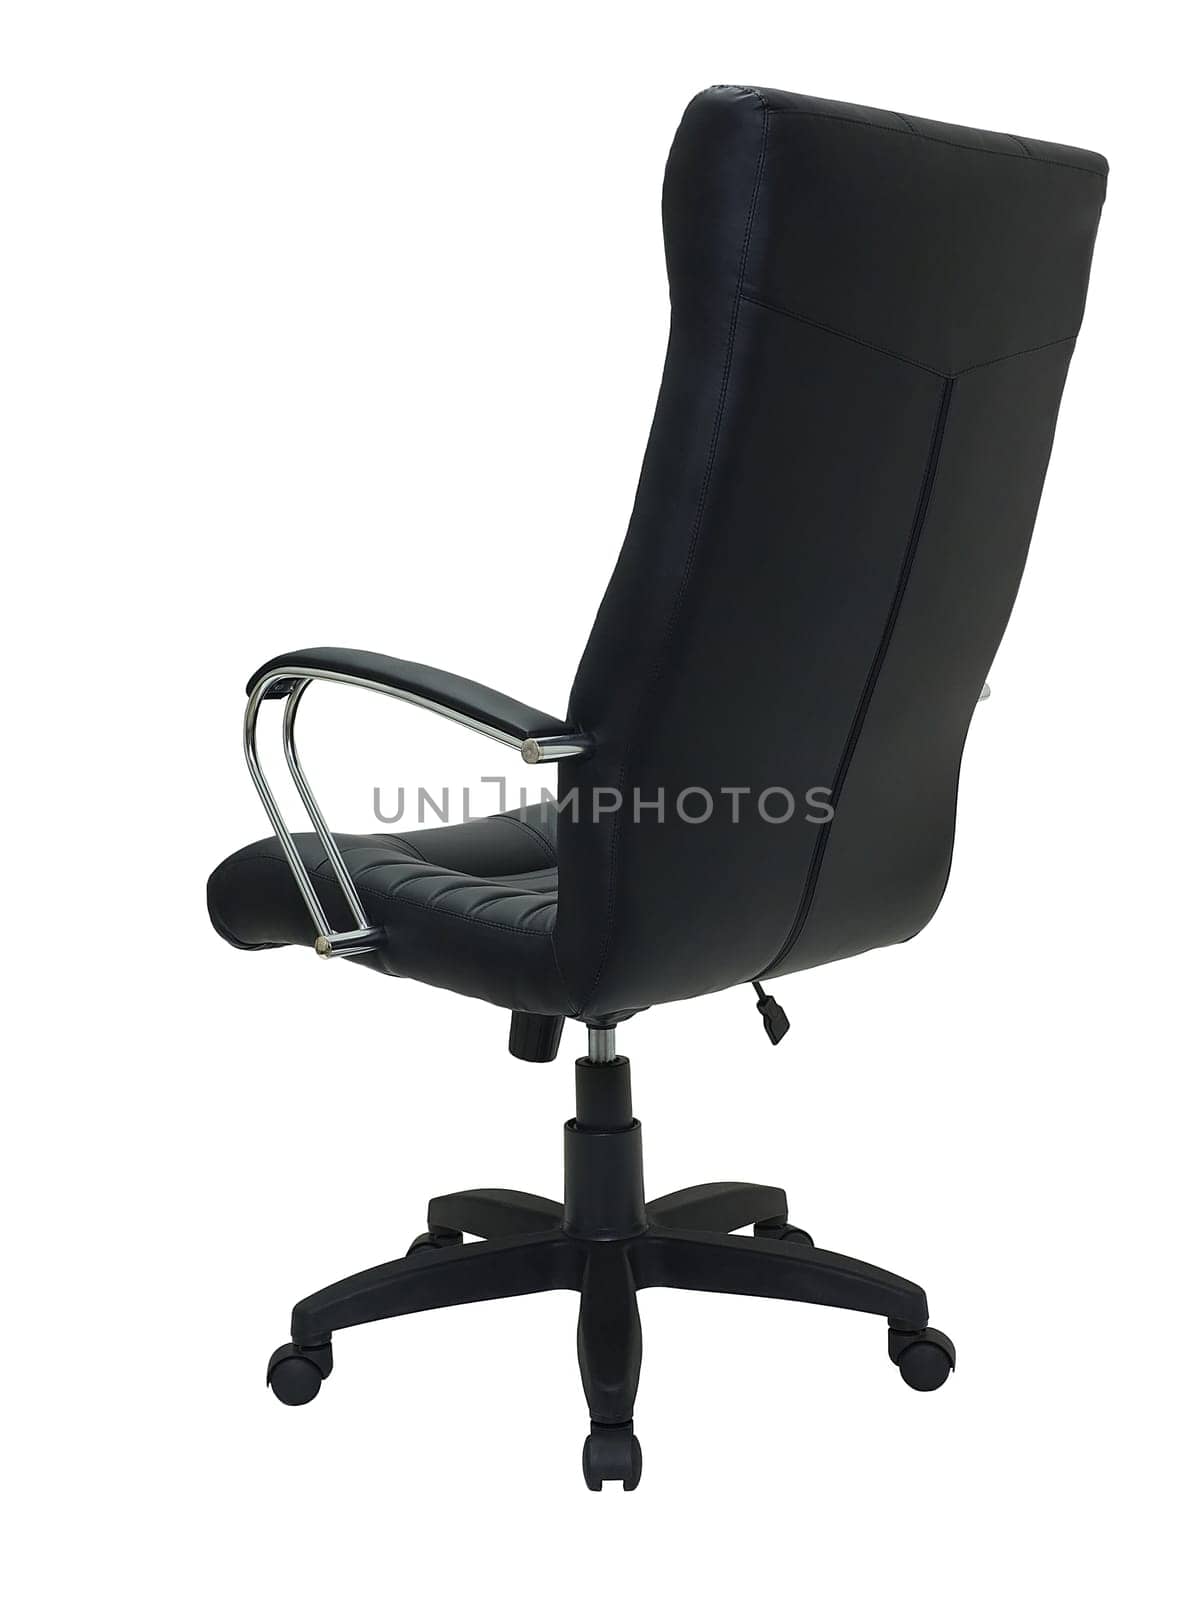 black leather armchair on wheels isolated on white background, back view. modern furniture in minimal style, interior, home design